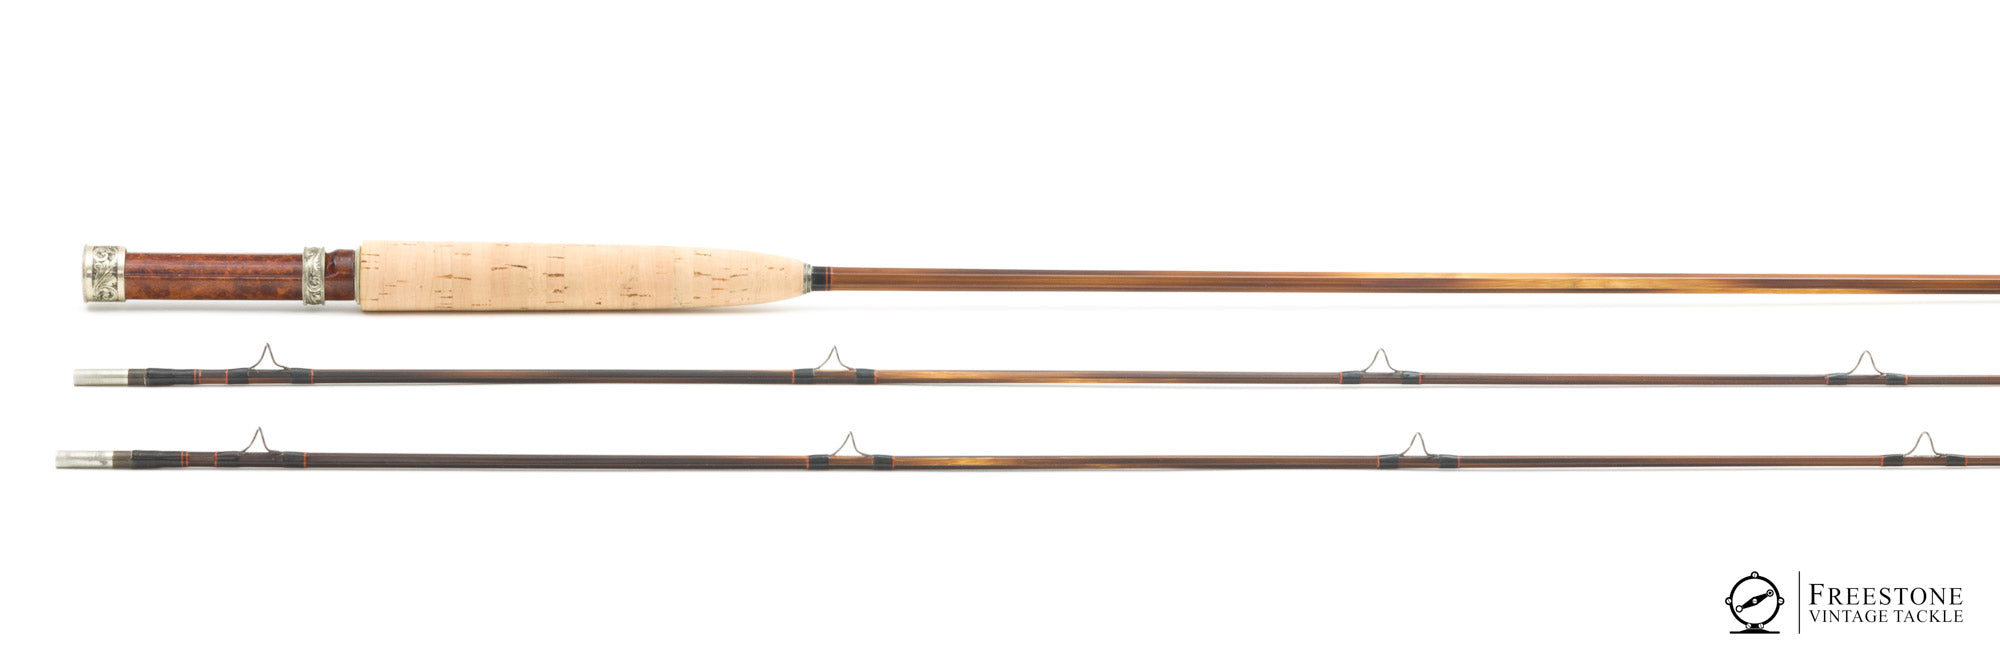 French, Paul - 7' 2/2 4wt Bamboo Rod - Freestone Vintage Tackle